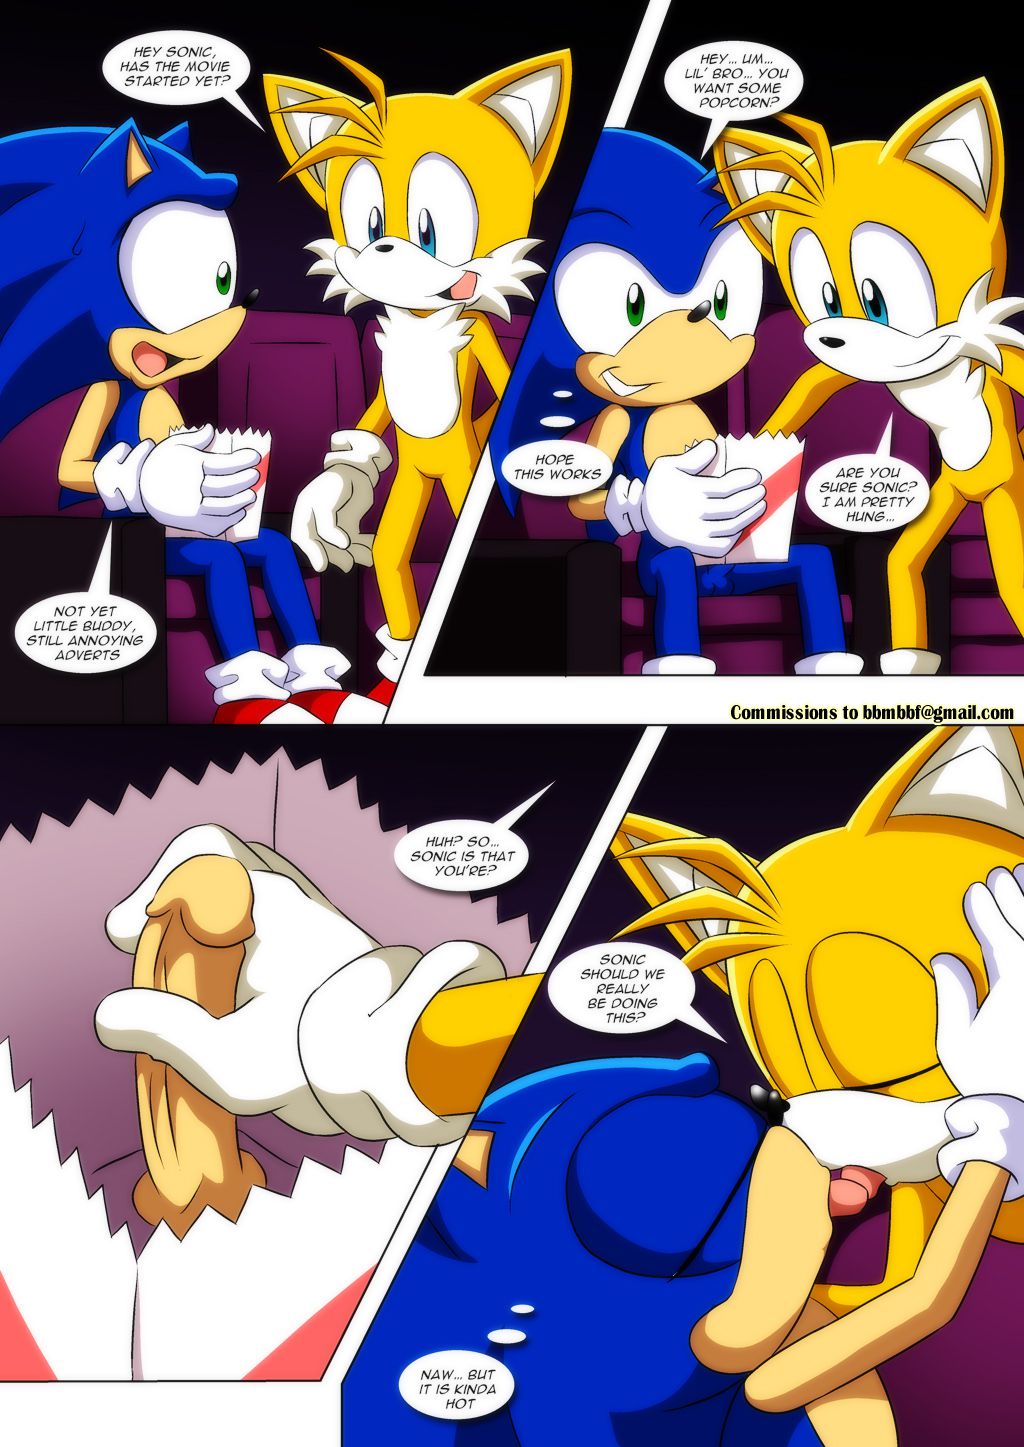 [Palcomix] The Pact 2 (Sonic The Hedgehog) [Ongoing] 4